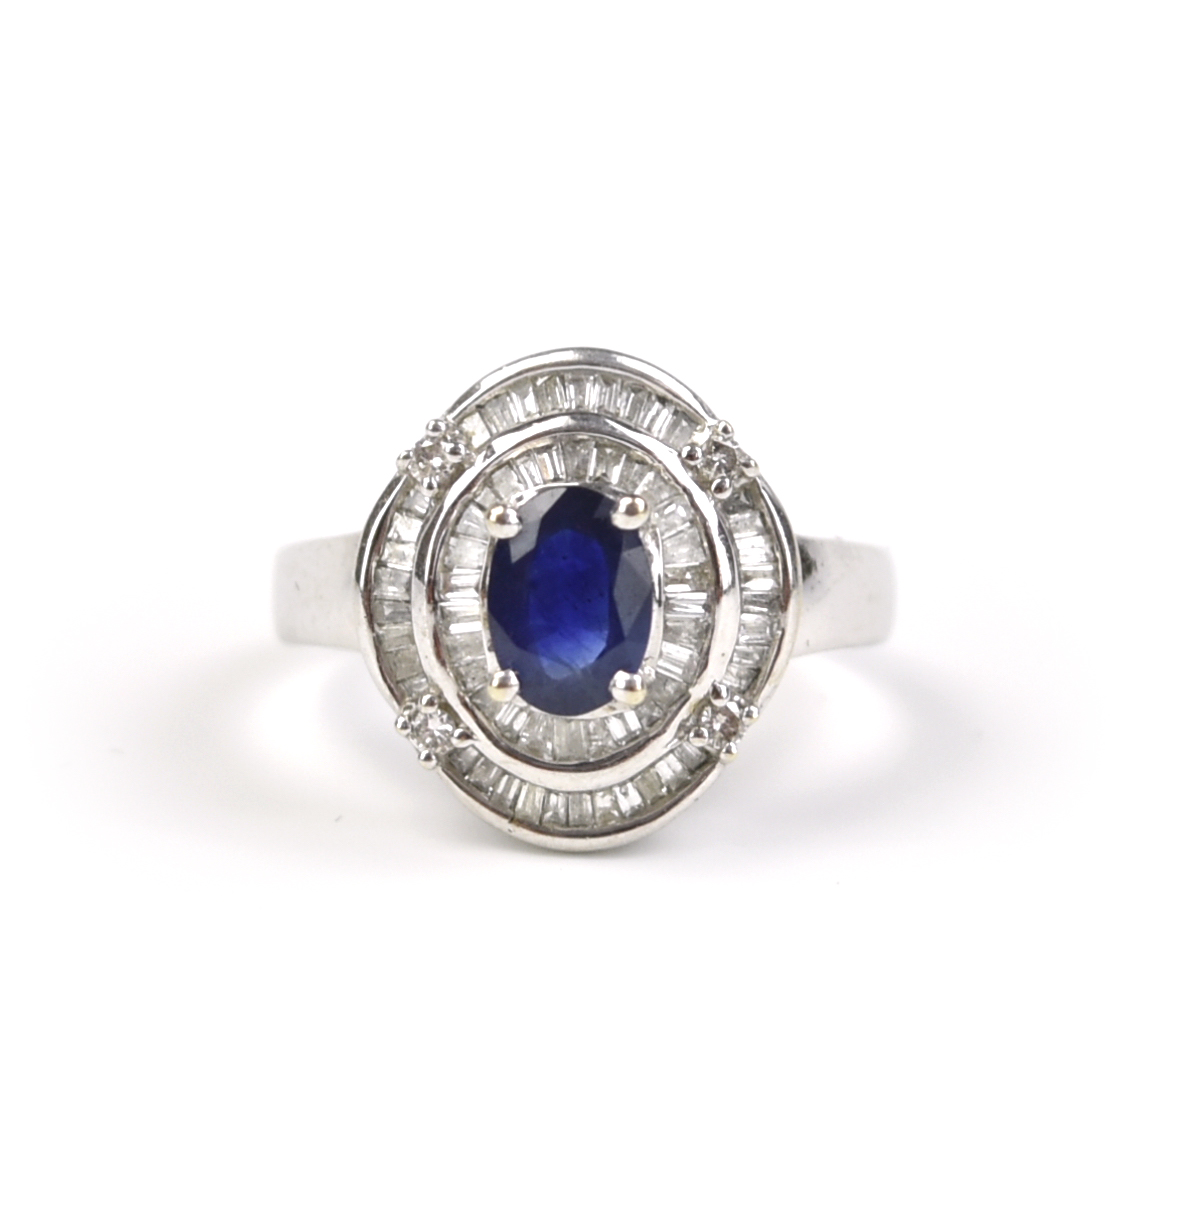 A BLUE SAPPHIRE RING WITH DIAMONDS 3396fe